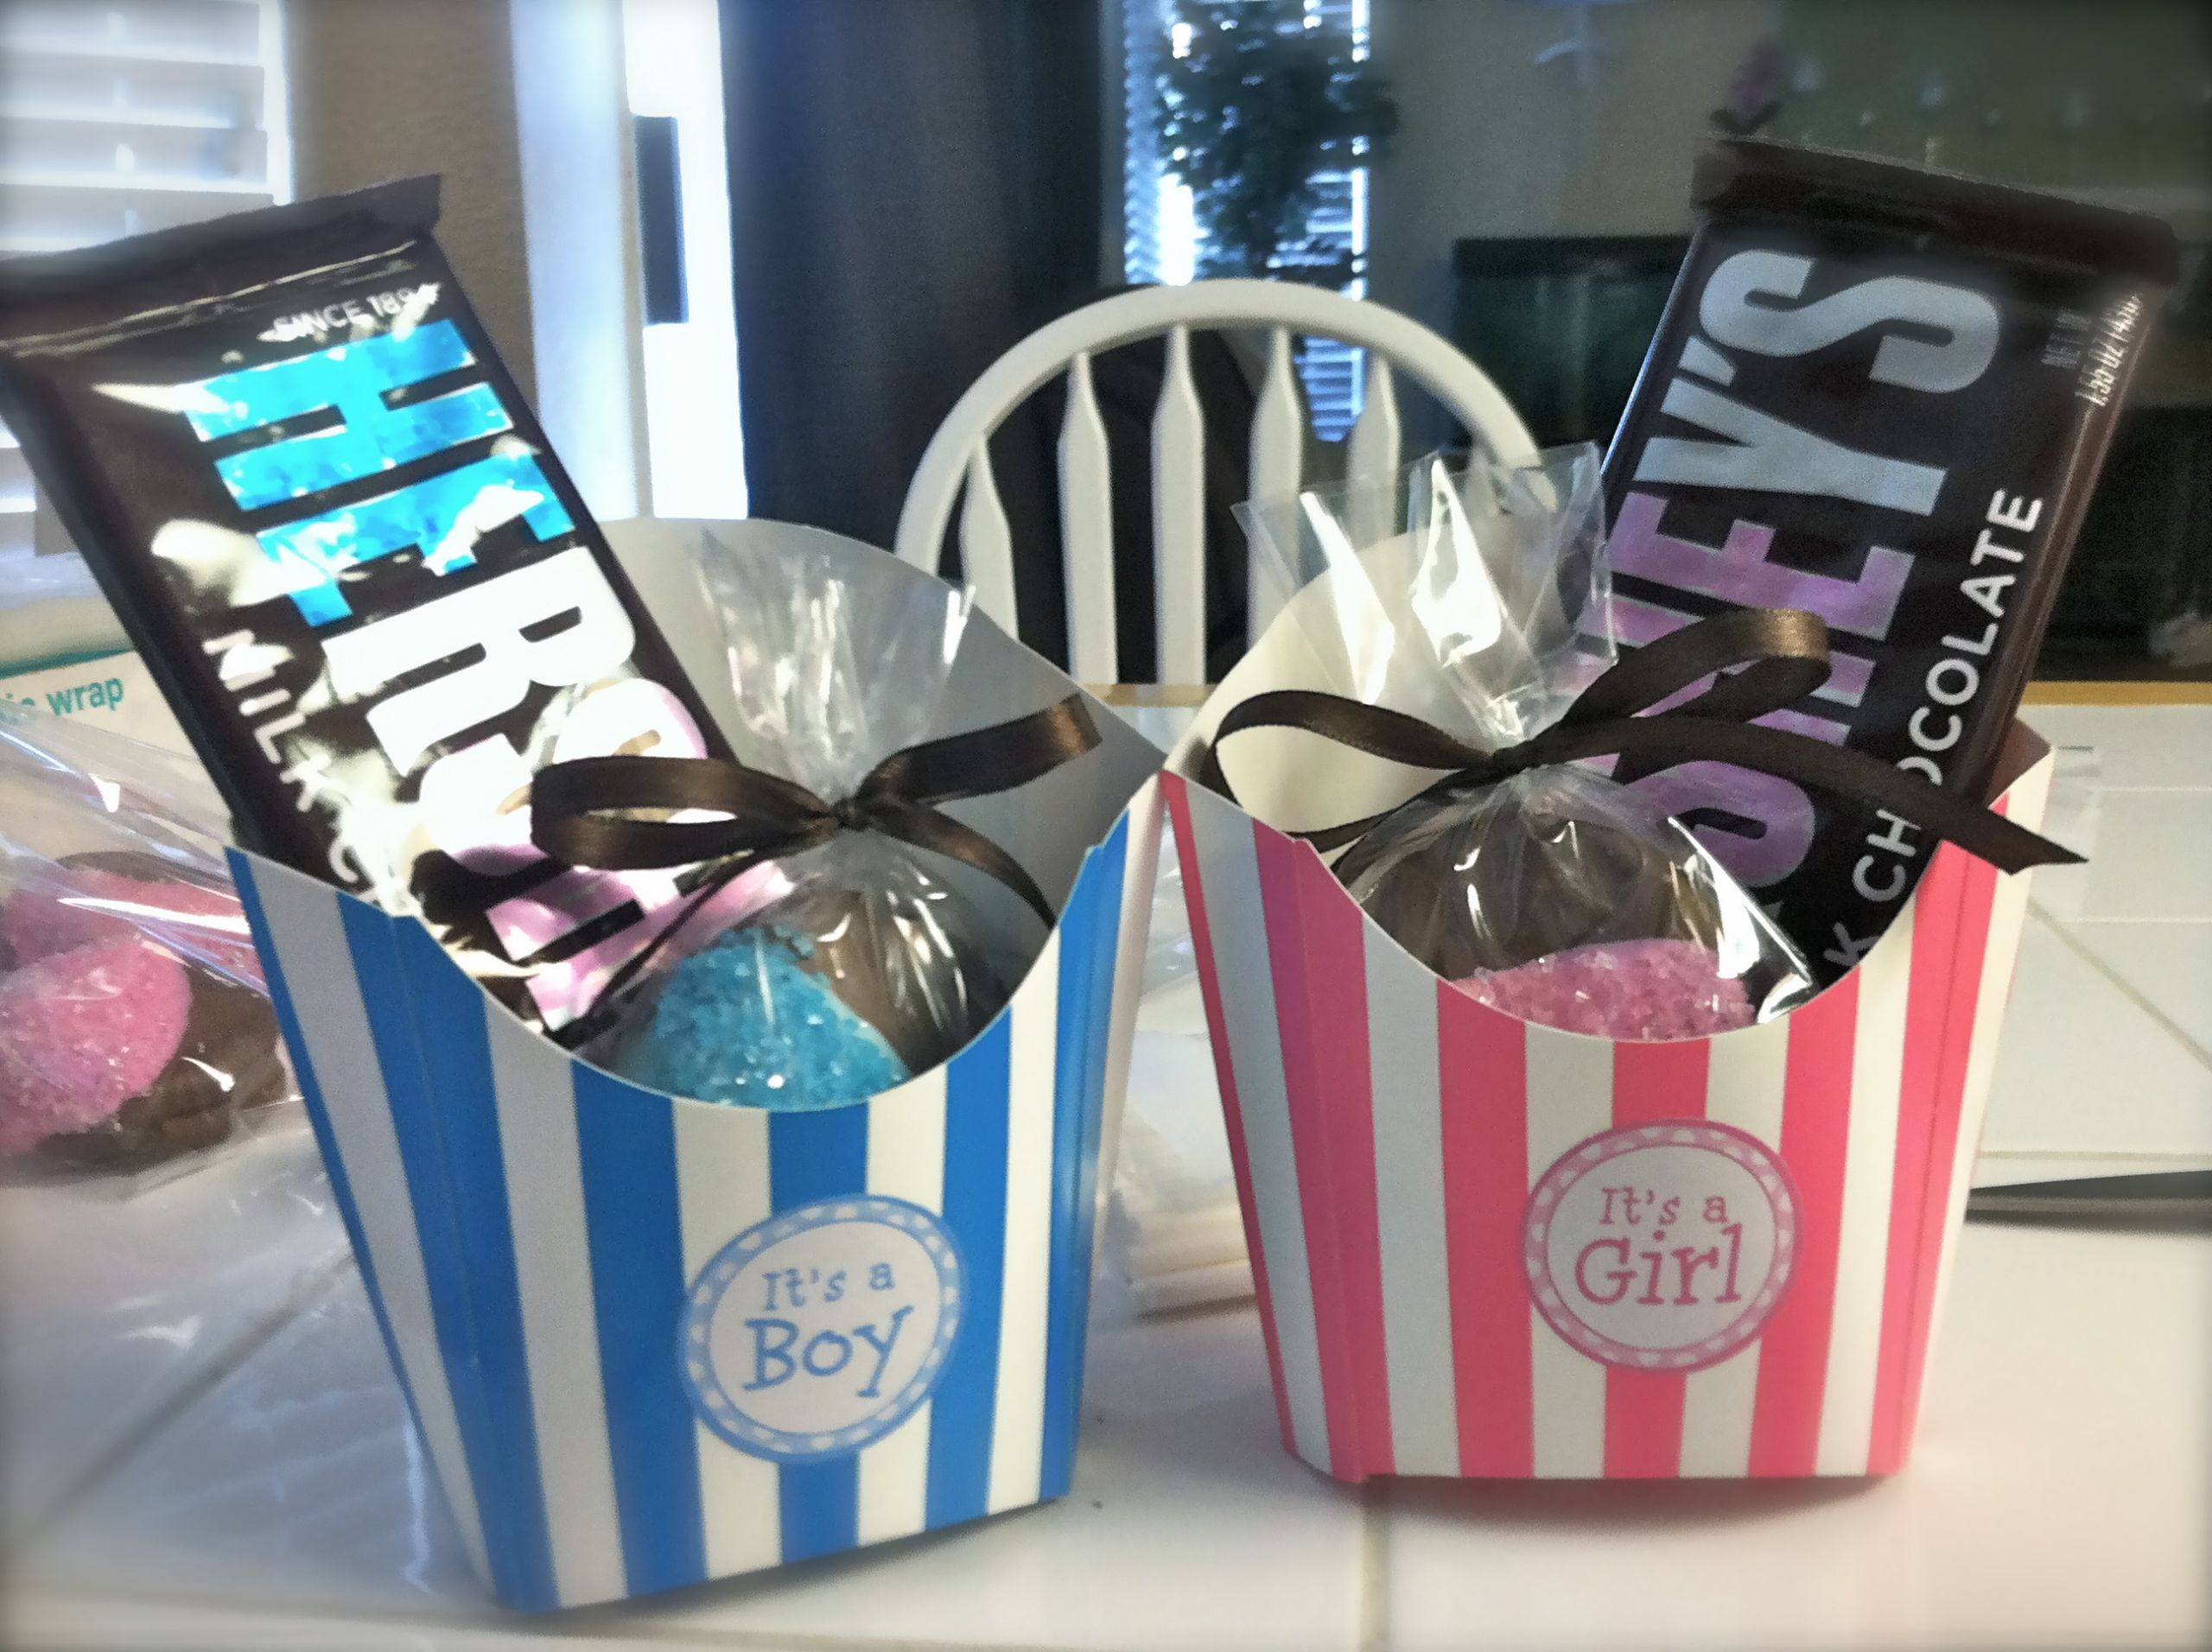 Gift Ideas For A Gender Reveal Party
 Our Gender Reveal Party